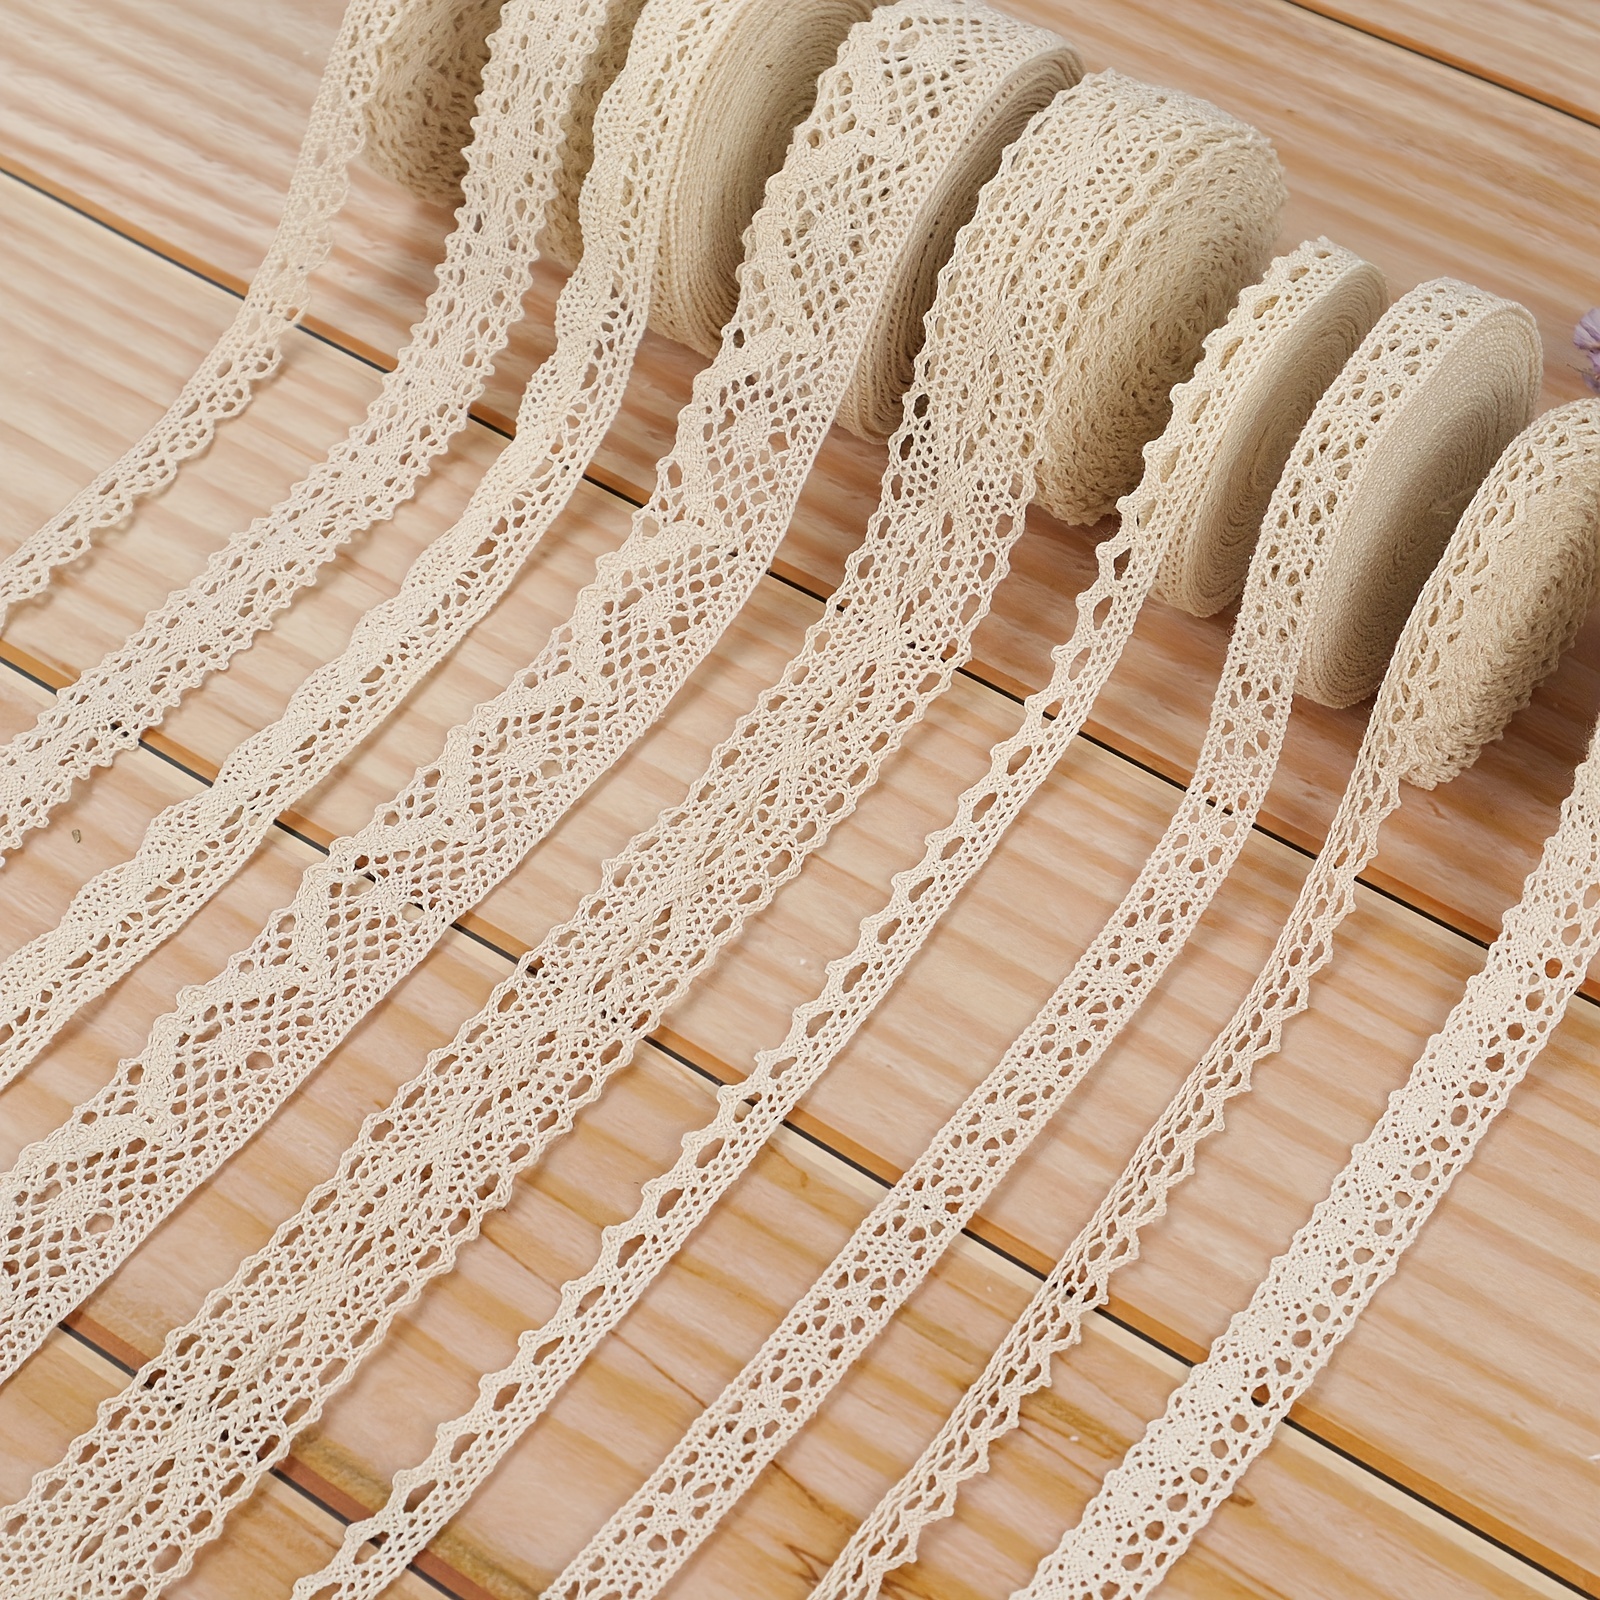 Lace Ribbon Cotton Crochet Lace Trim White Sewing Lace Ribbon by The Yard  Assorted Eyelet Lace Ribbon Trim for Scrapbooking Dream Catcher Decorative  Crafts Supply Approx 30 Yards (White)